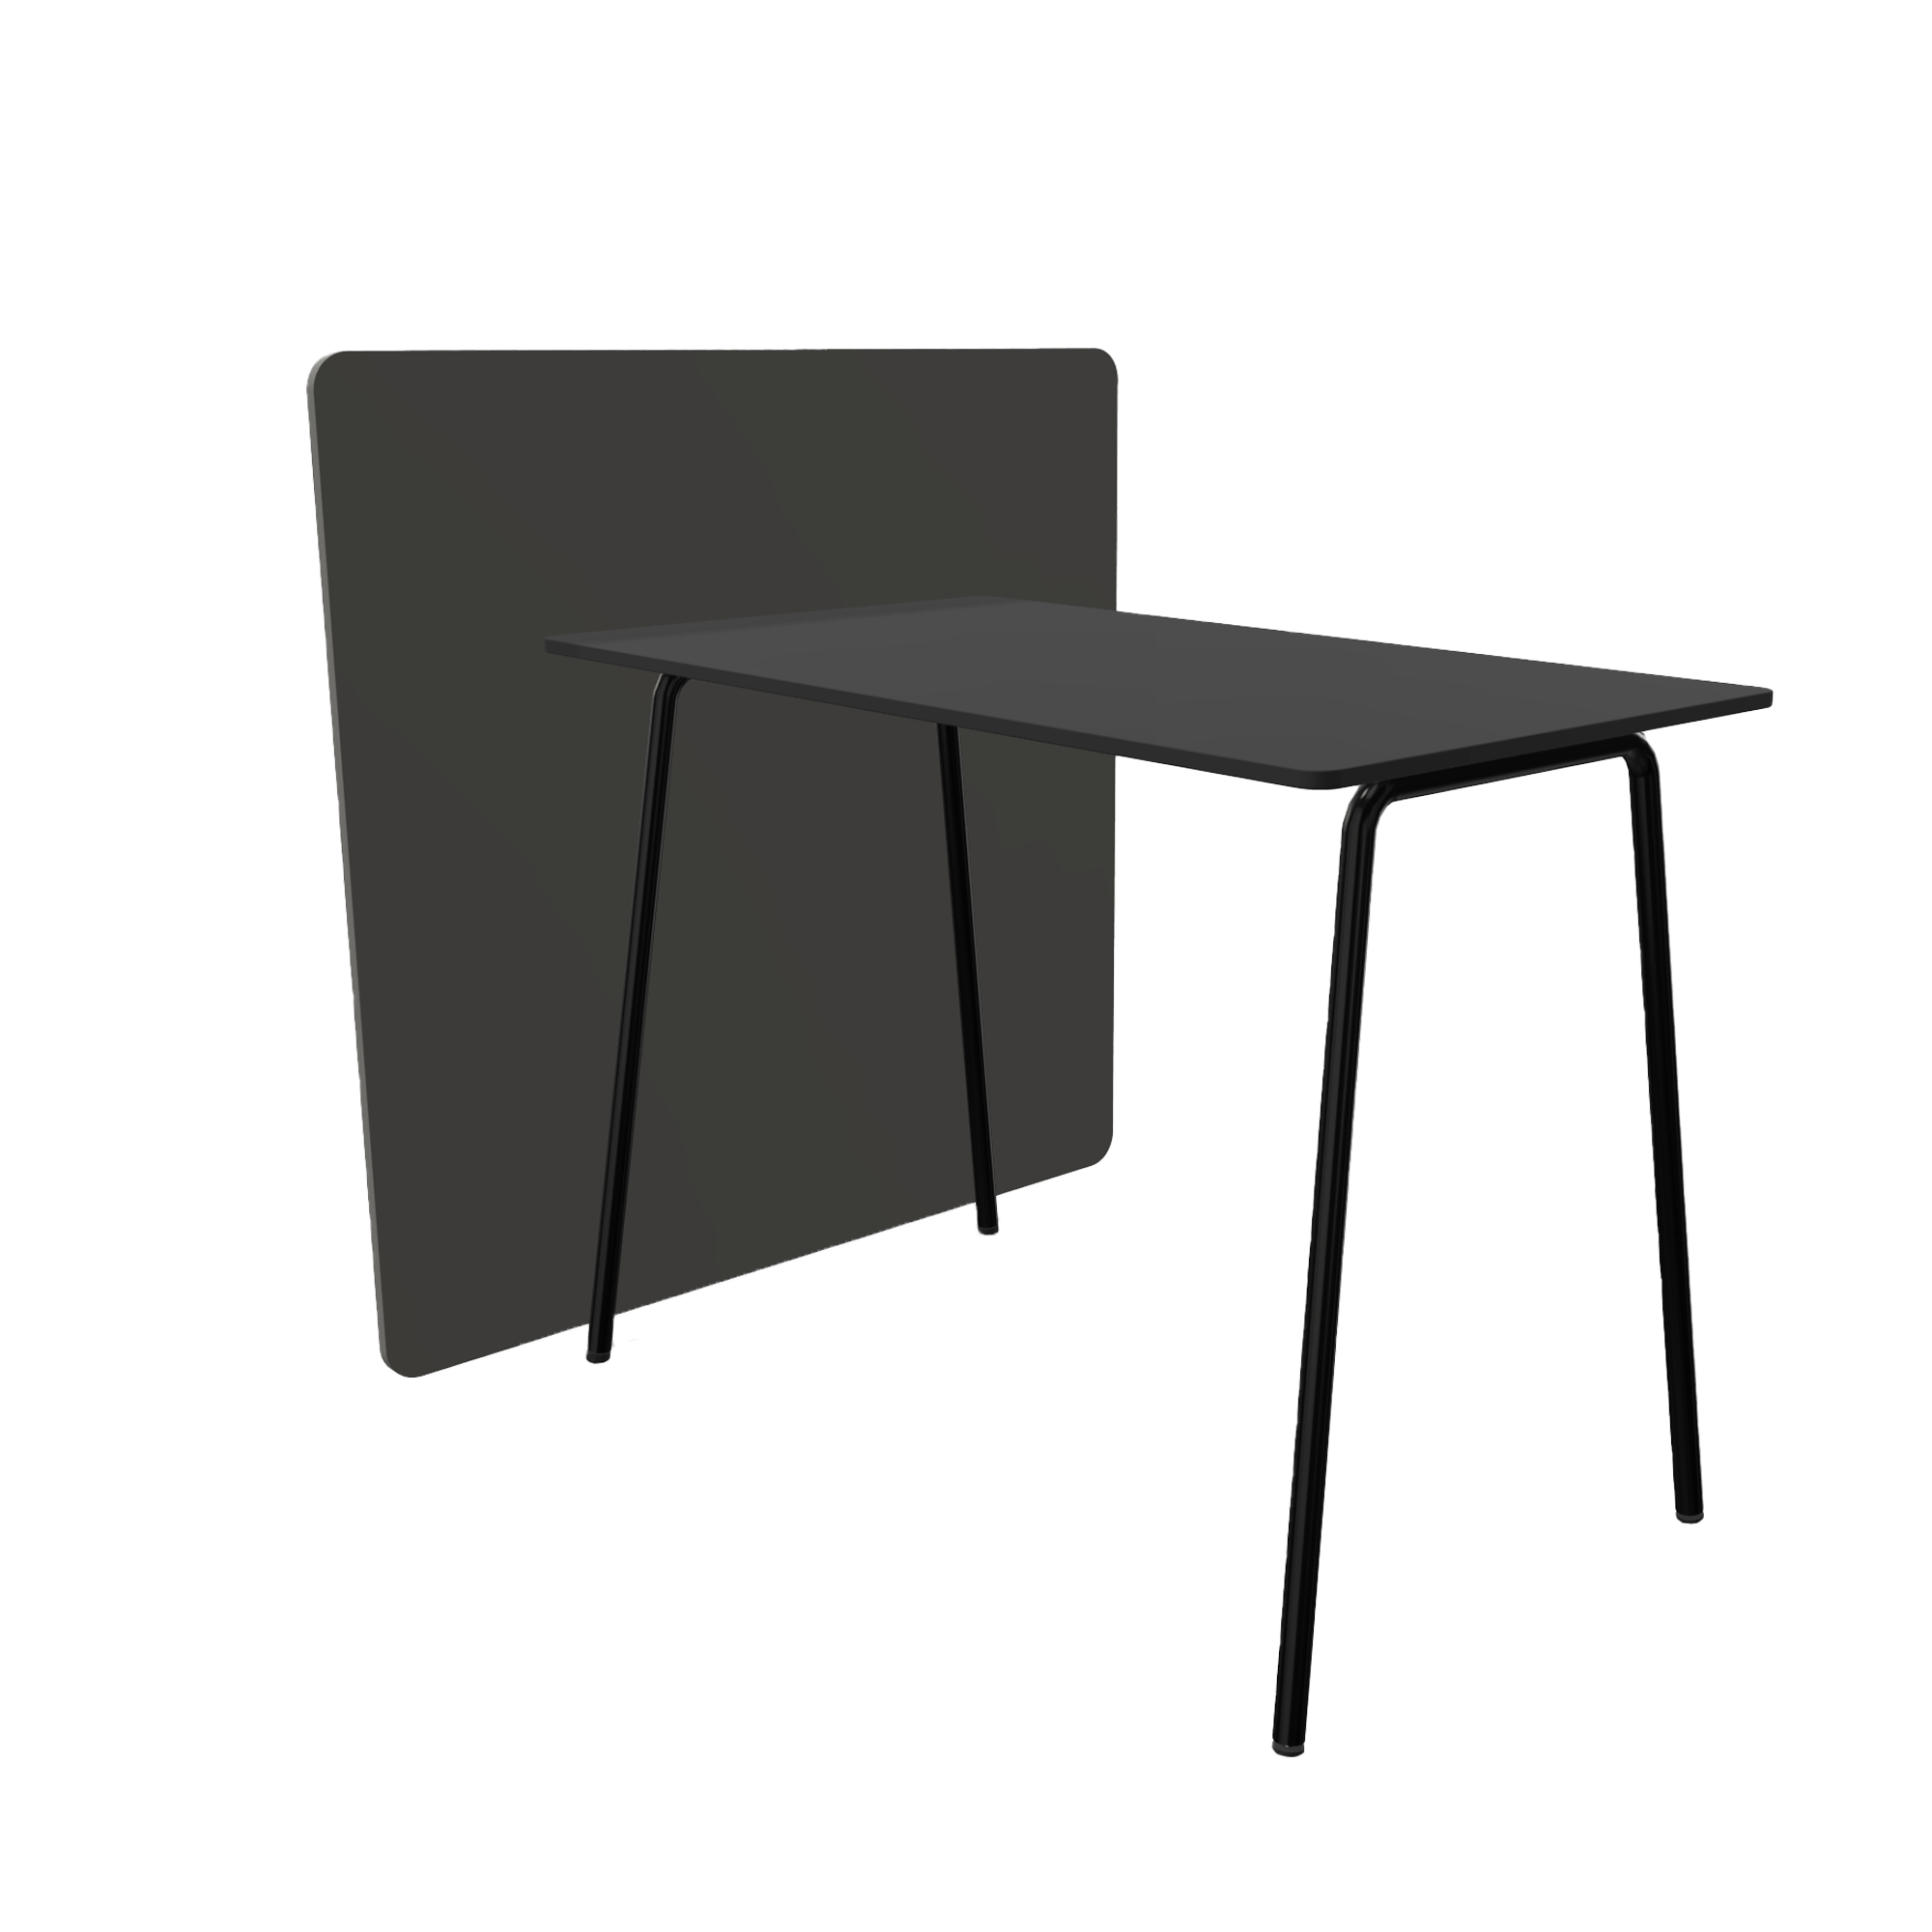 A black counter height table with black legs and a black office screen divider attached to one side